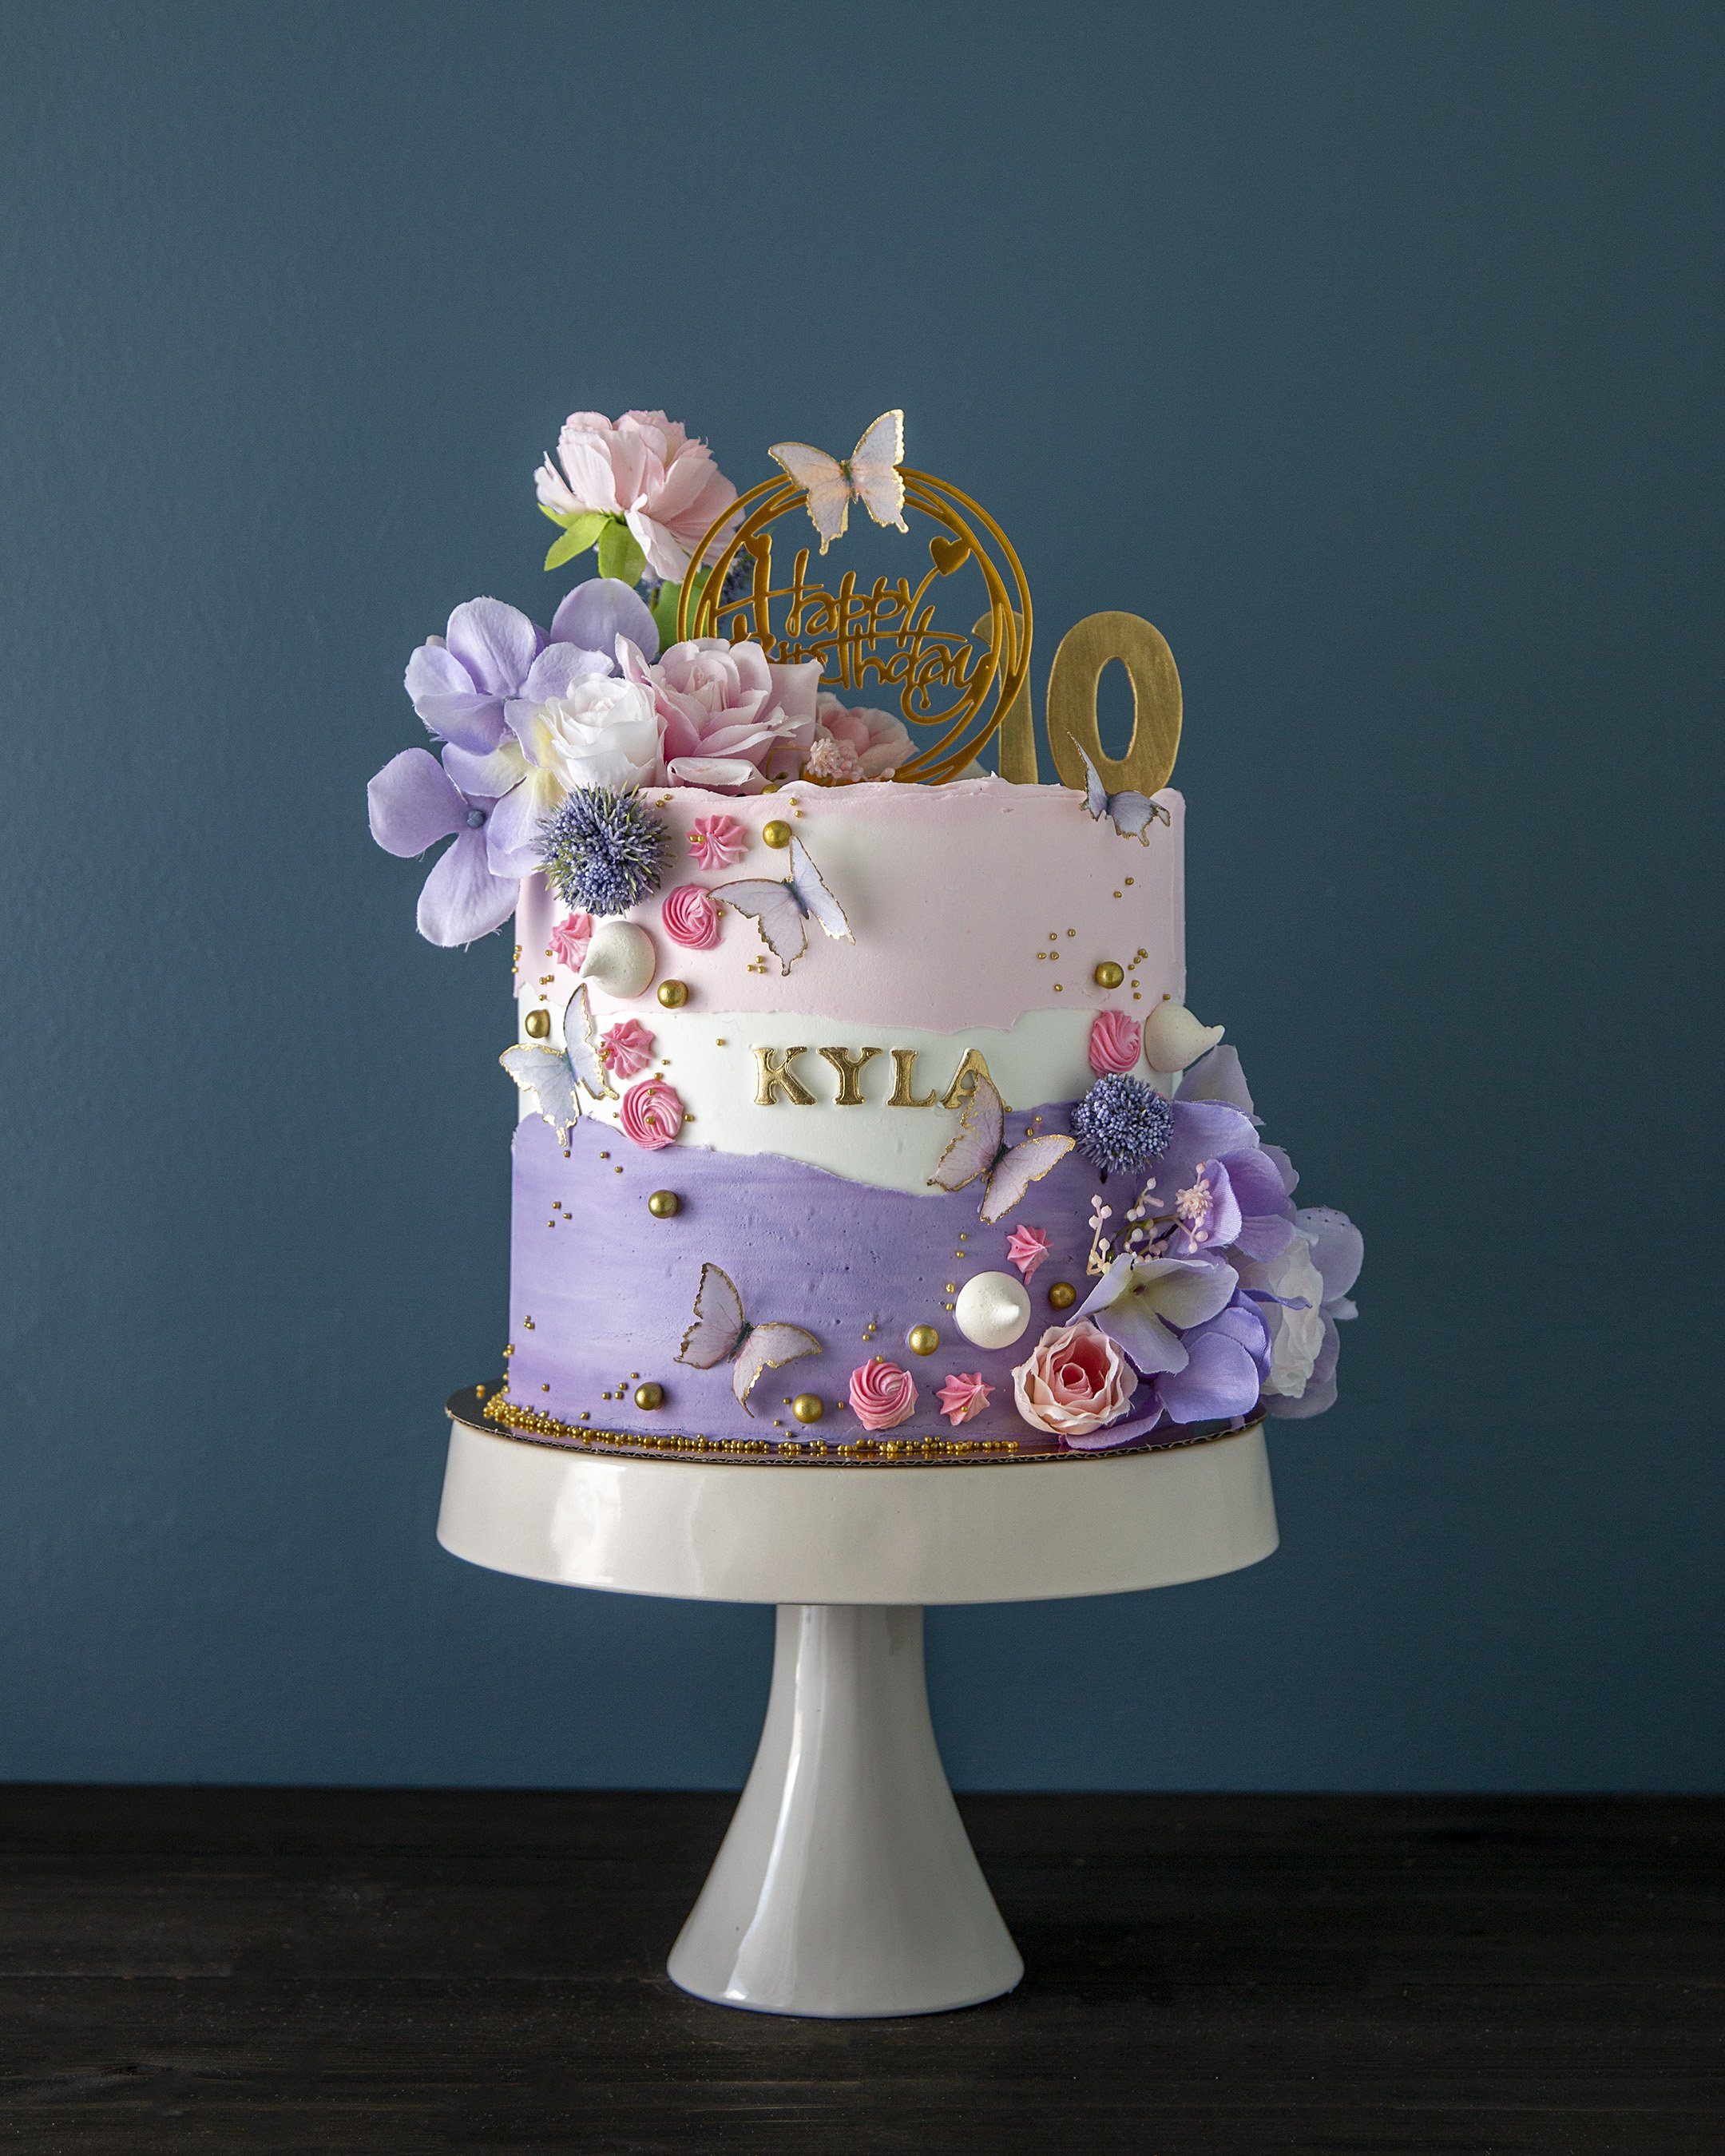 How to Make a Floral Birthday Cake - Celebrate & Decorate